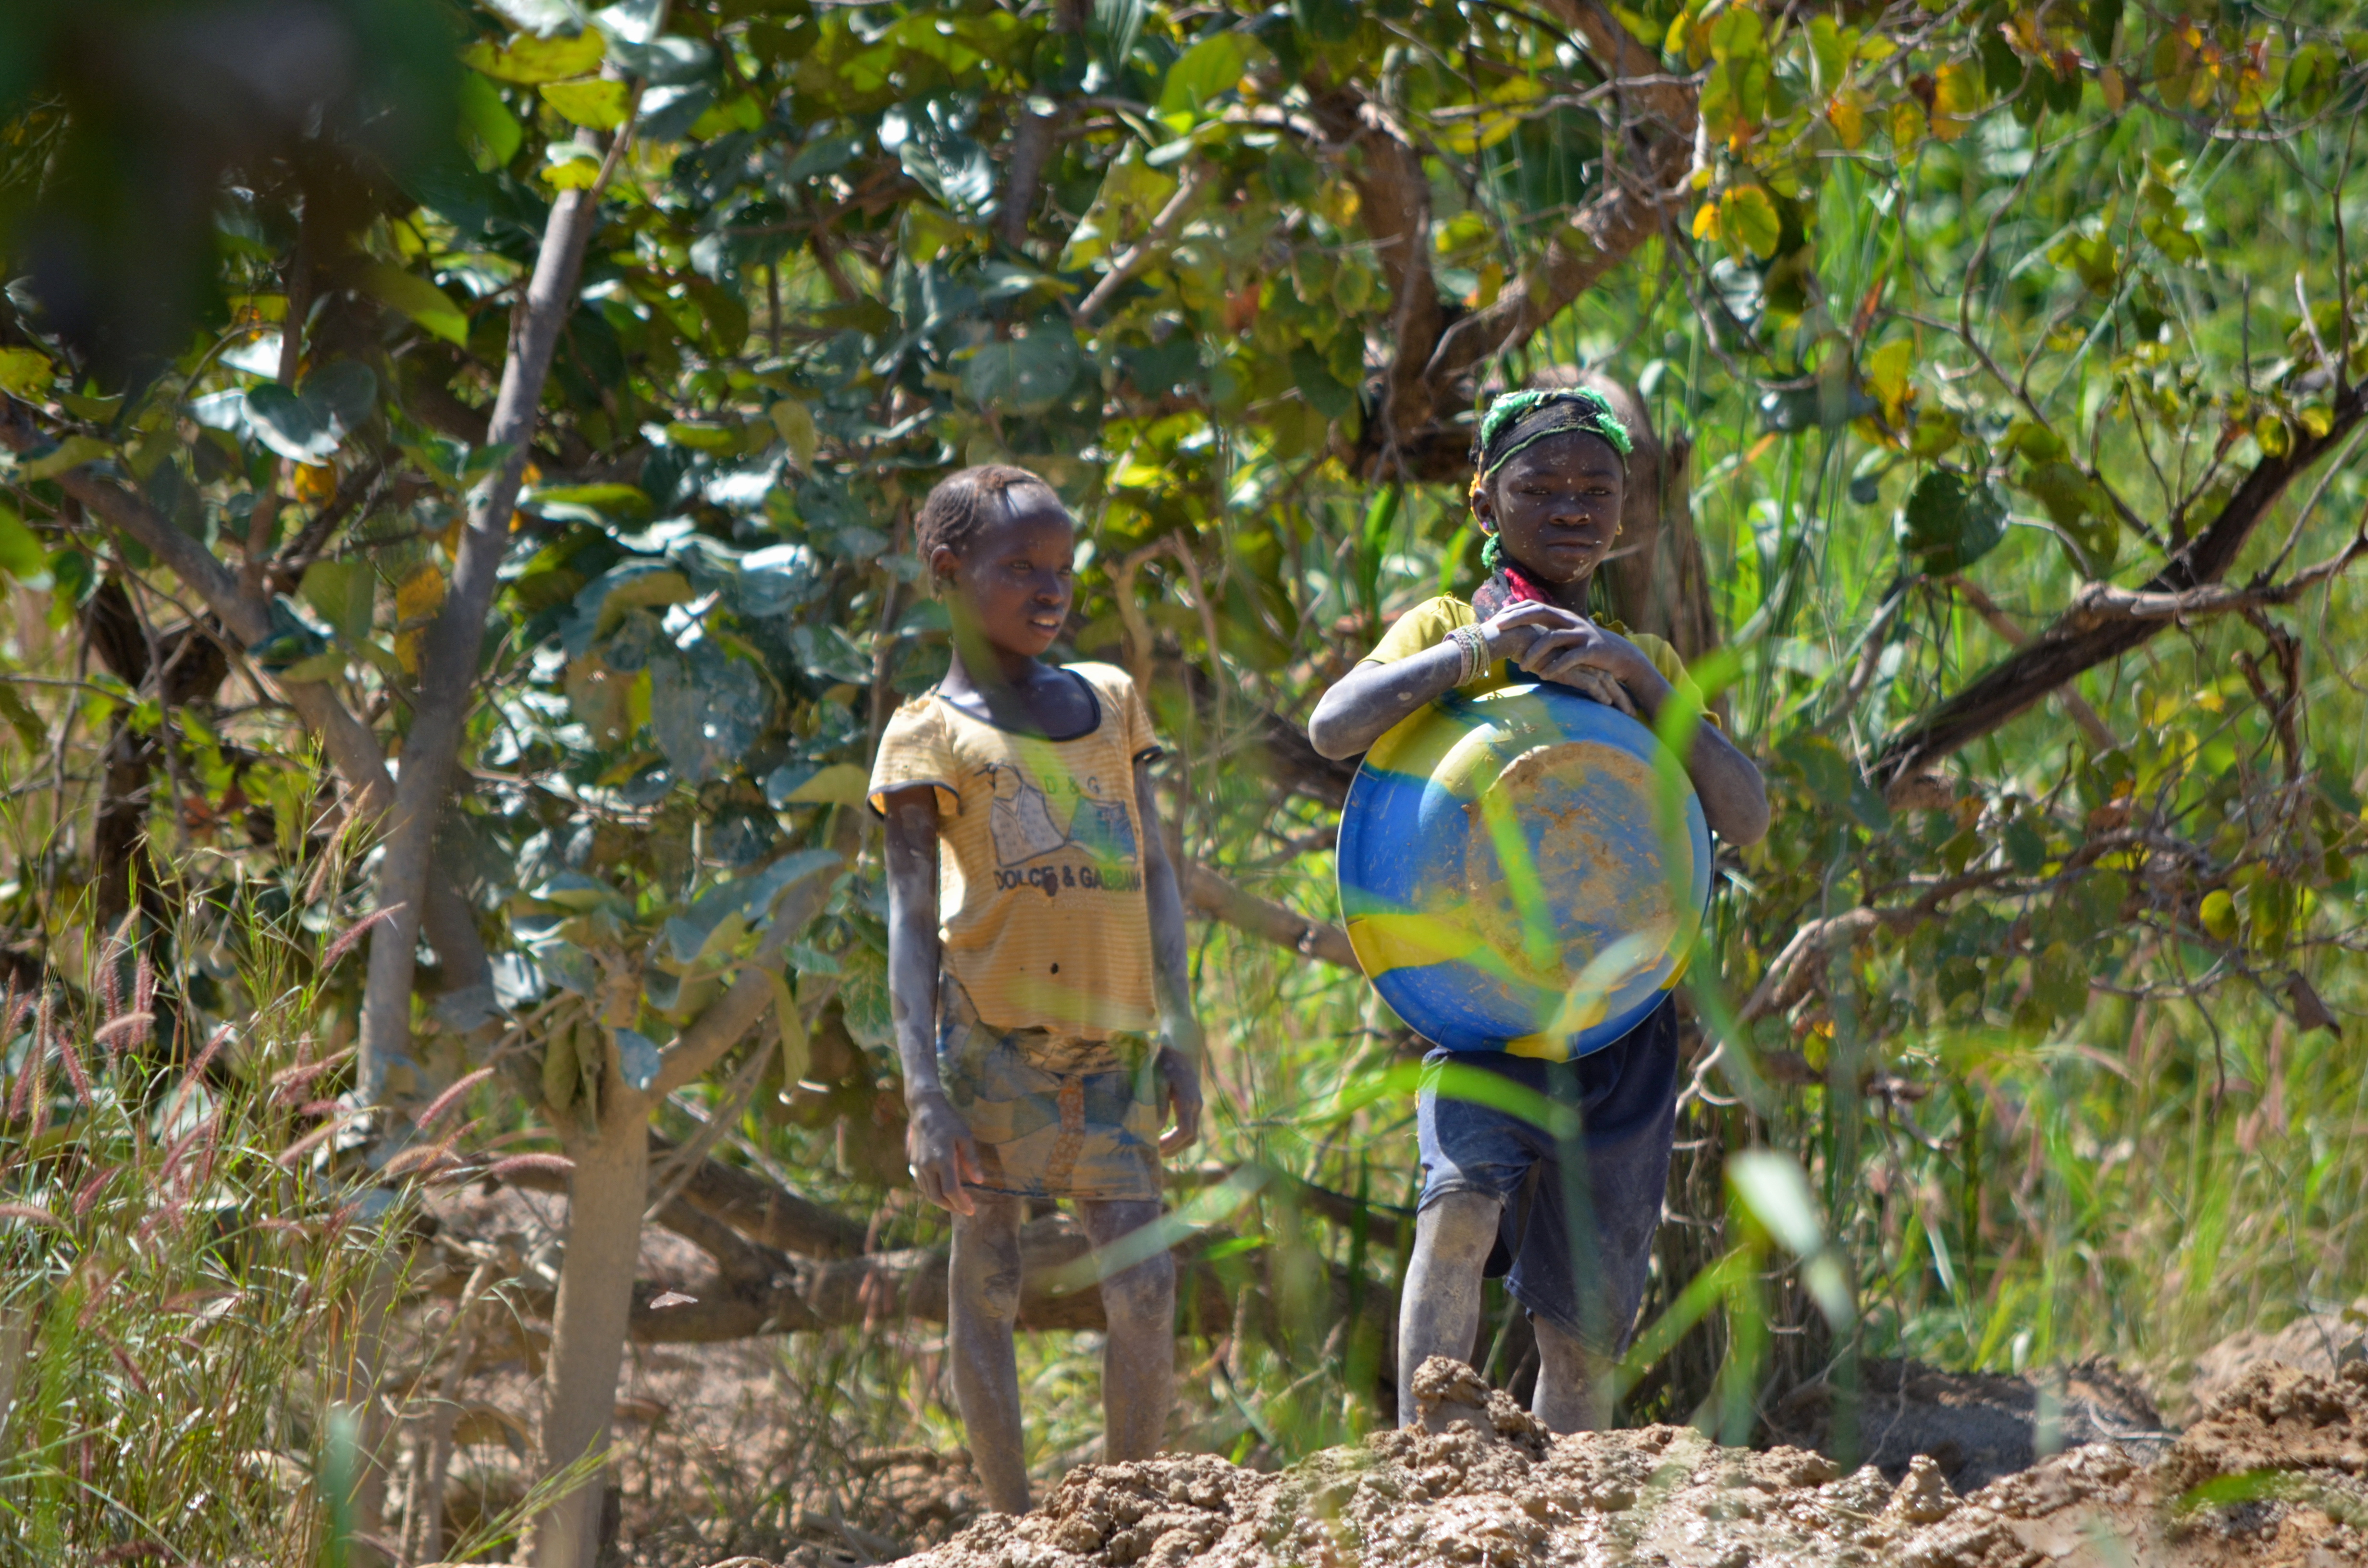 Cooperating with the private sector in child labour free zones in Africa